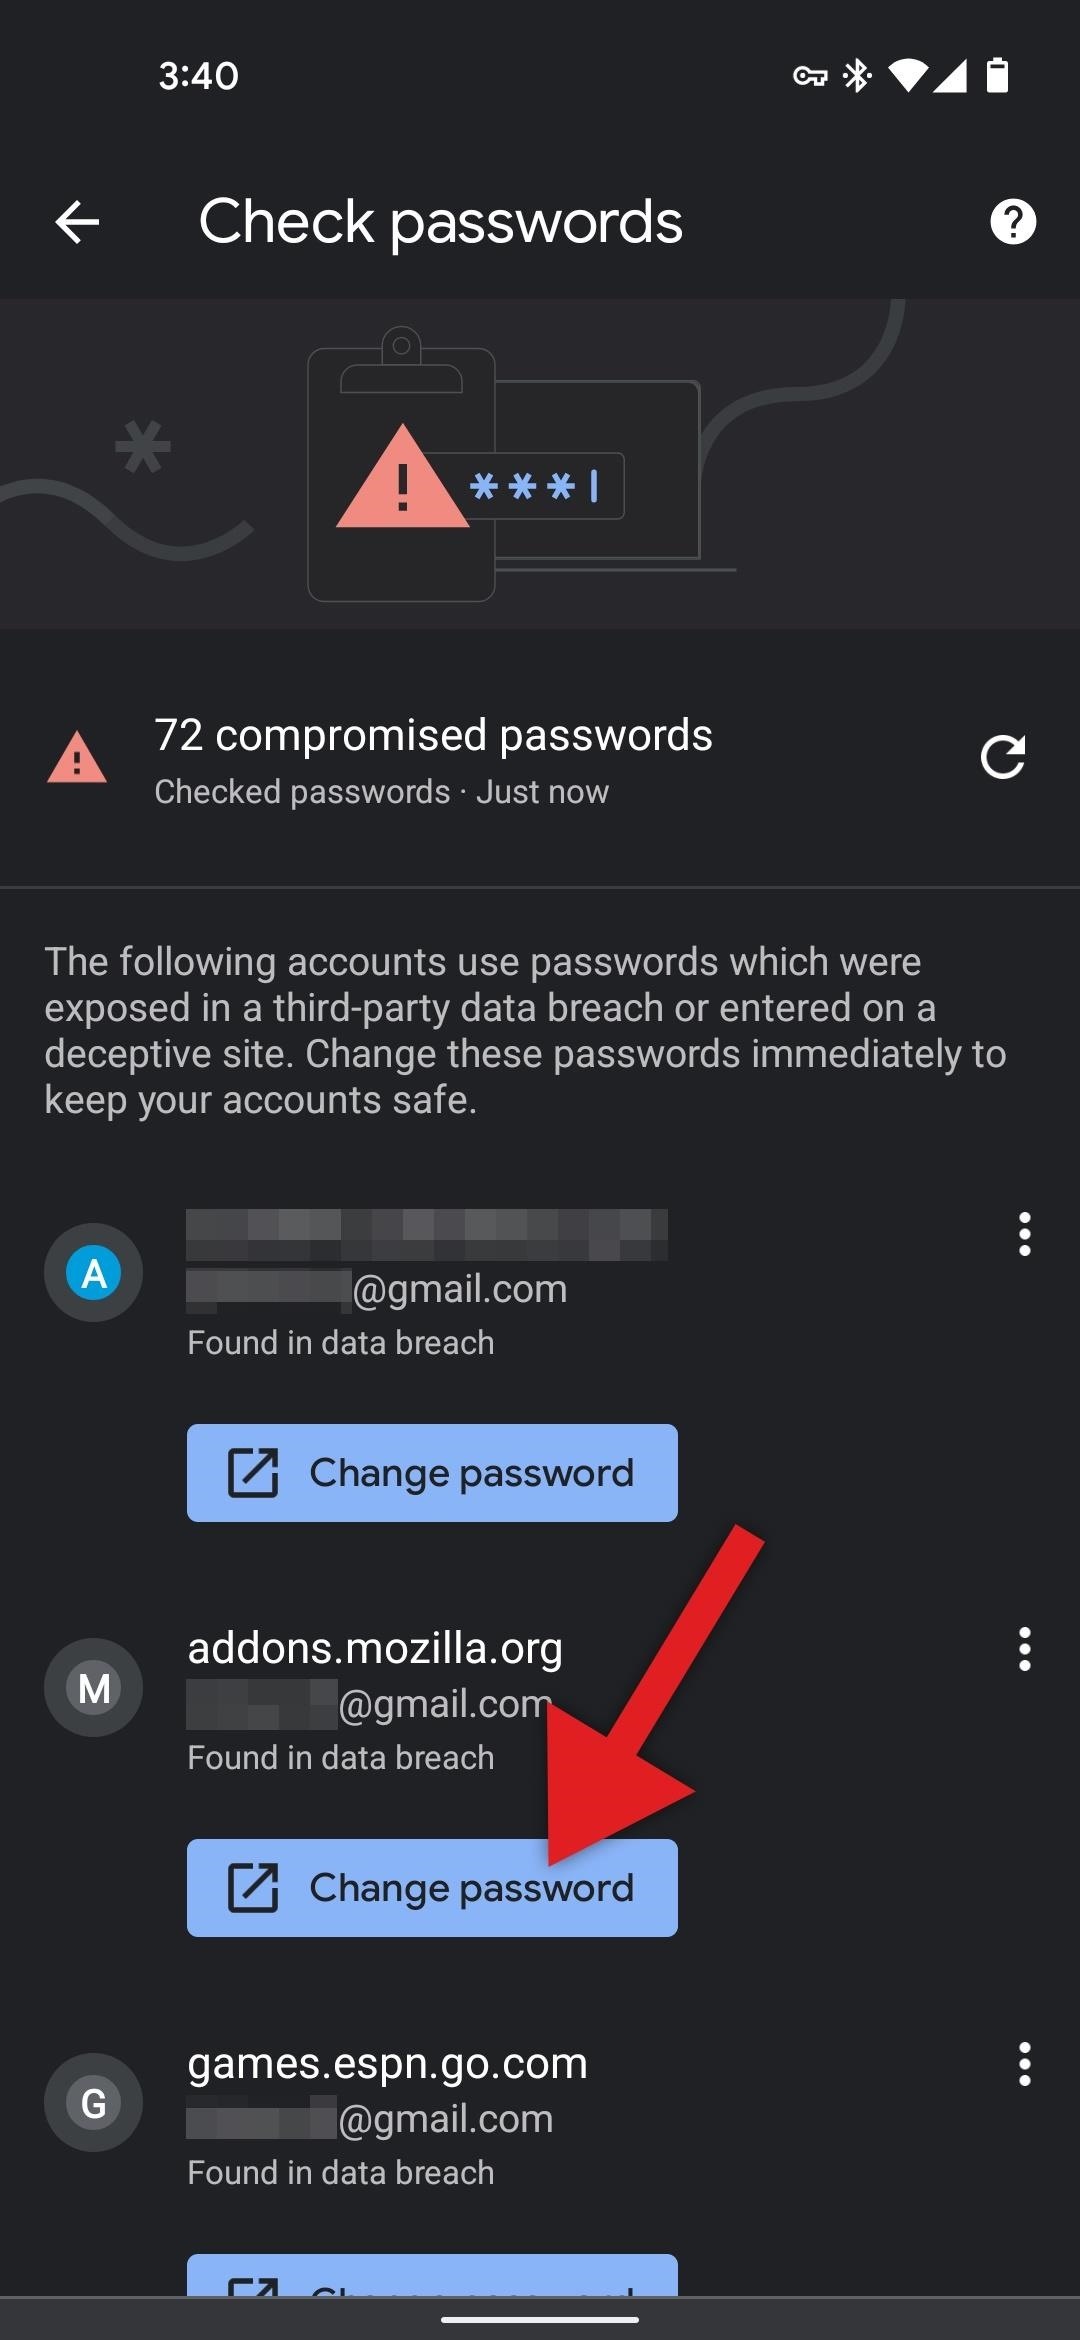 How to Scan Your Saved Passwords in Chrome to Find & Replace Compromised Login Info